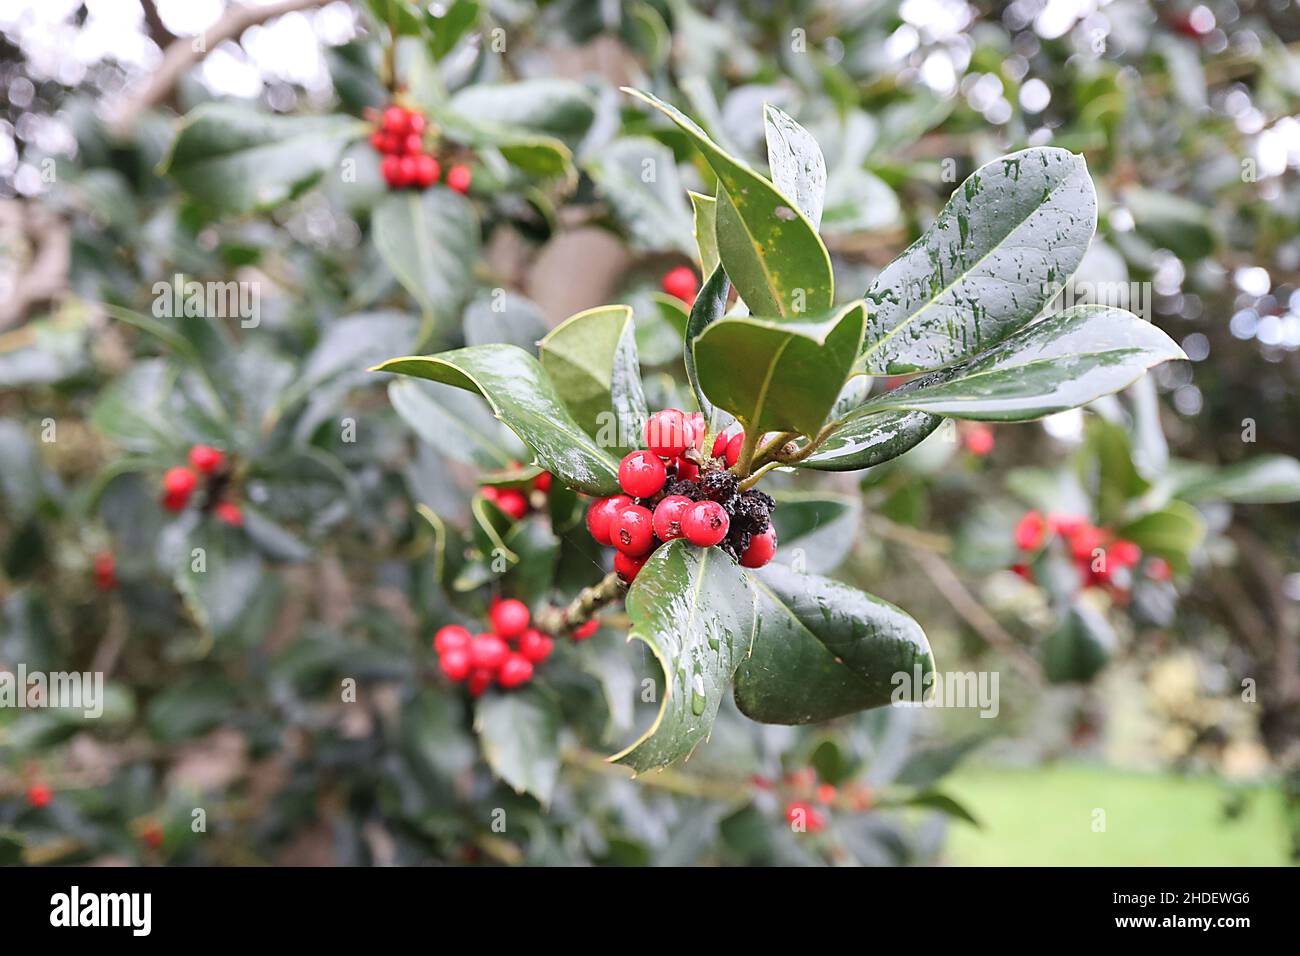 Ilex x altaclerensis ‘Hendersonii’ holly Hendersonii – dense clusters of red berries and glossy dark green leaves,  January, England, UK Stock Photo